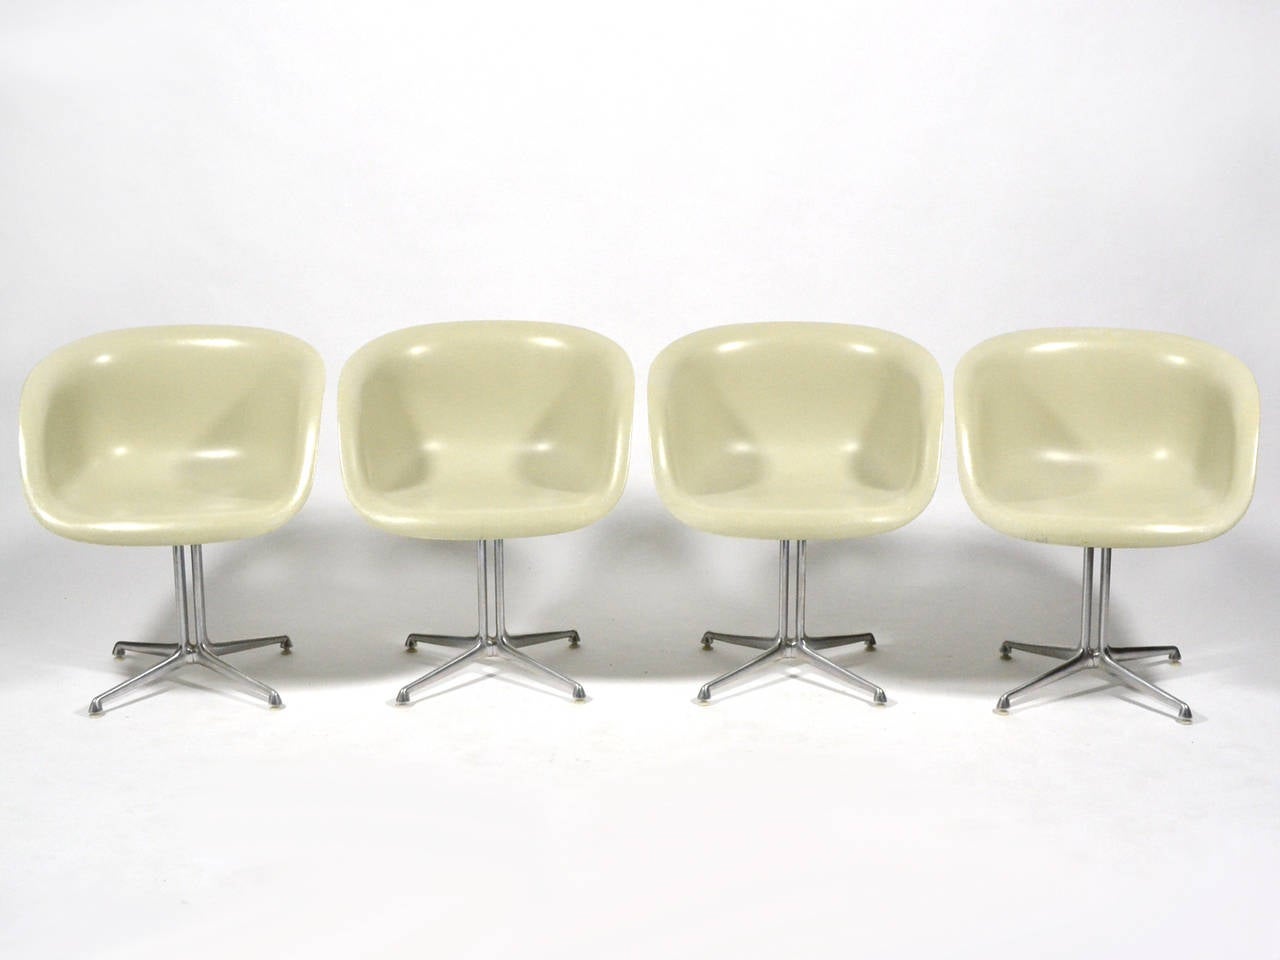 Created in collaboration with Charles and Ray Eames, when Alexander Girard was designing the interior of La Fonda Del Sol restaurant, these chairs are a variation of the Eames fiberglass shell chair with a lower back and a specially designed four